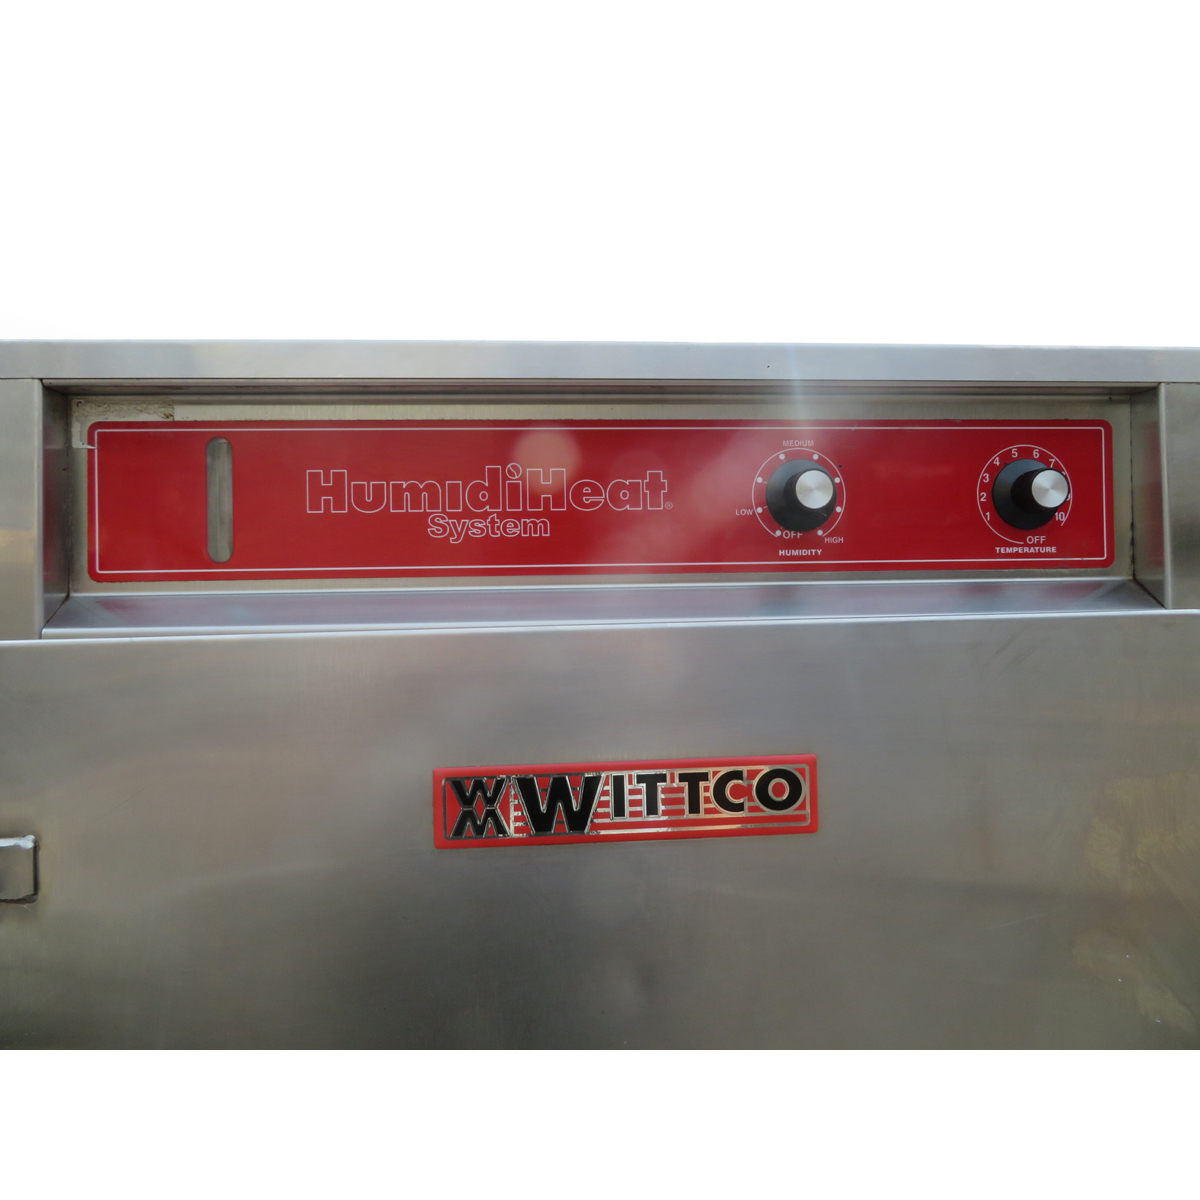 Wittco 826-15-C-IS-DD-HMD Stainless Steel Commercial Holding Cabinet, Used Very Good Condition image 1